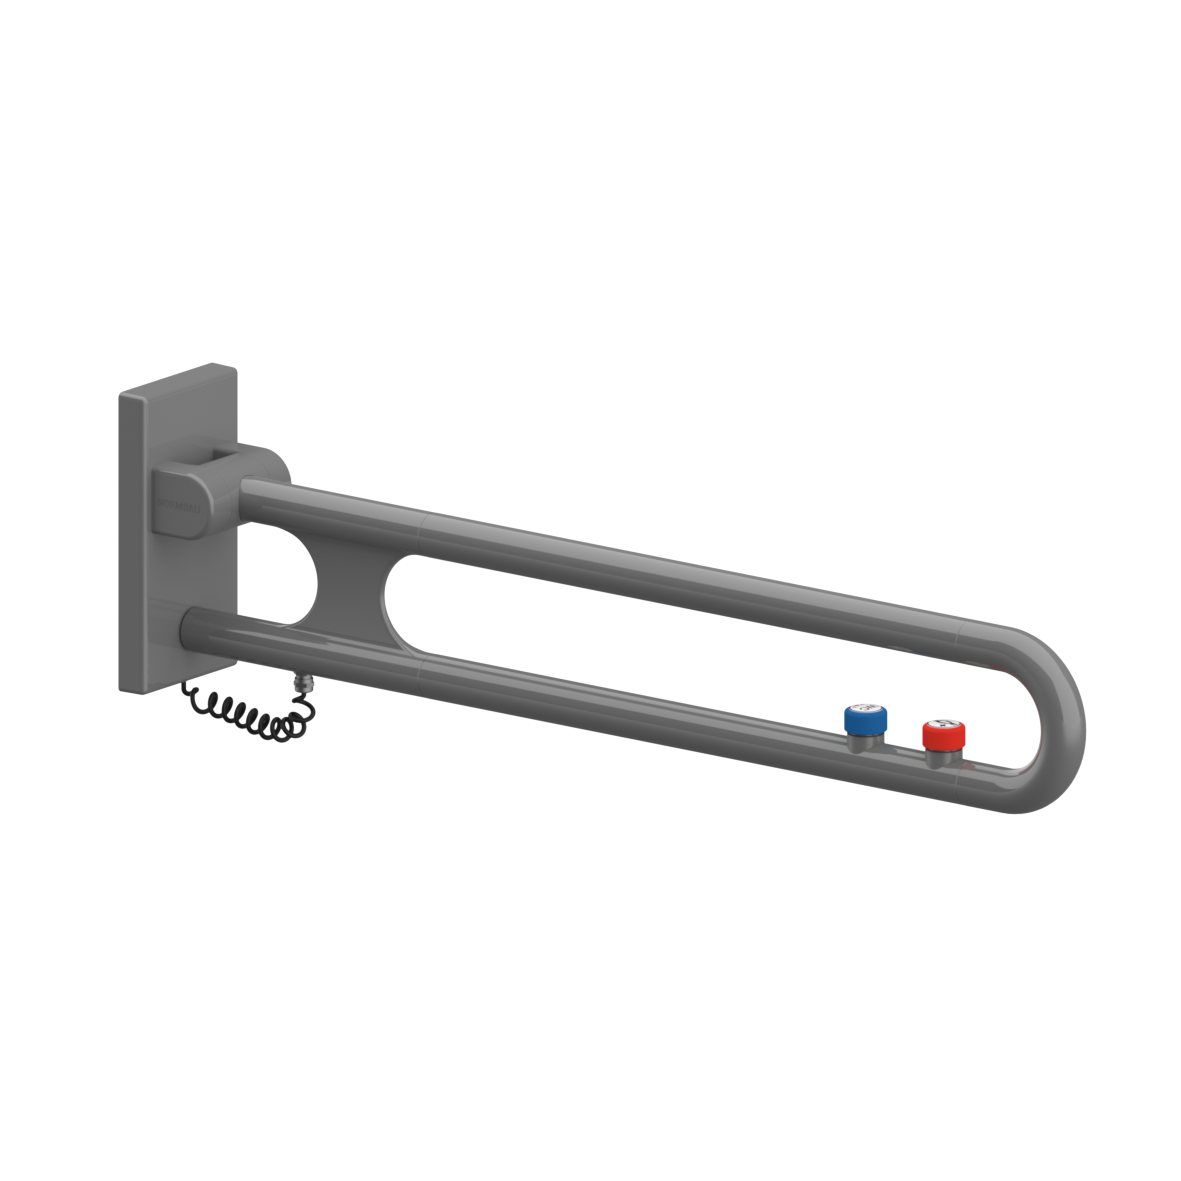 Nylon Care Lift-up support rail vario, with base plate, with 2 E-buttons (WC and call: NOC and NCC), left and right, L = 850 mm, connection covered with mounting plate, Dark grey